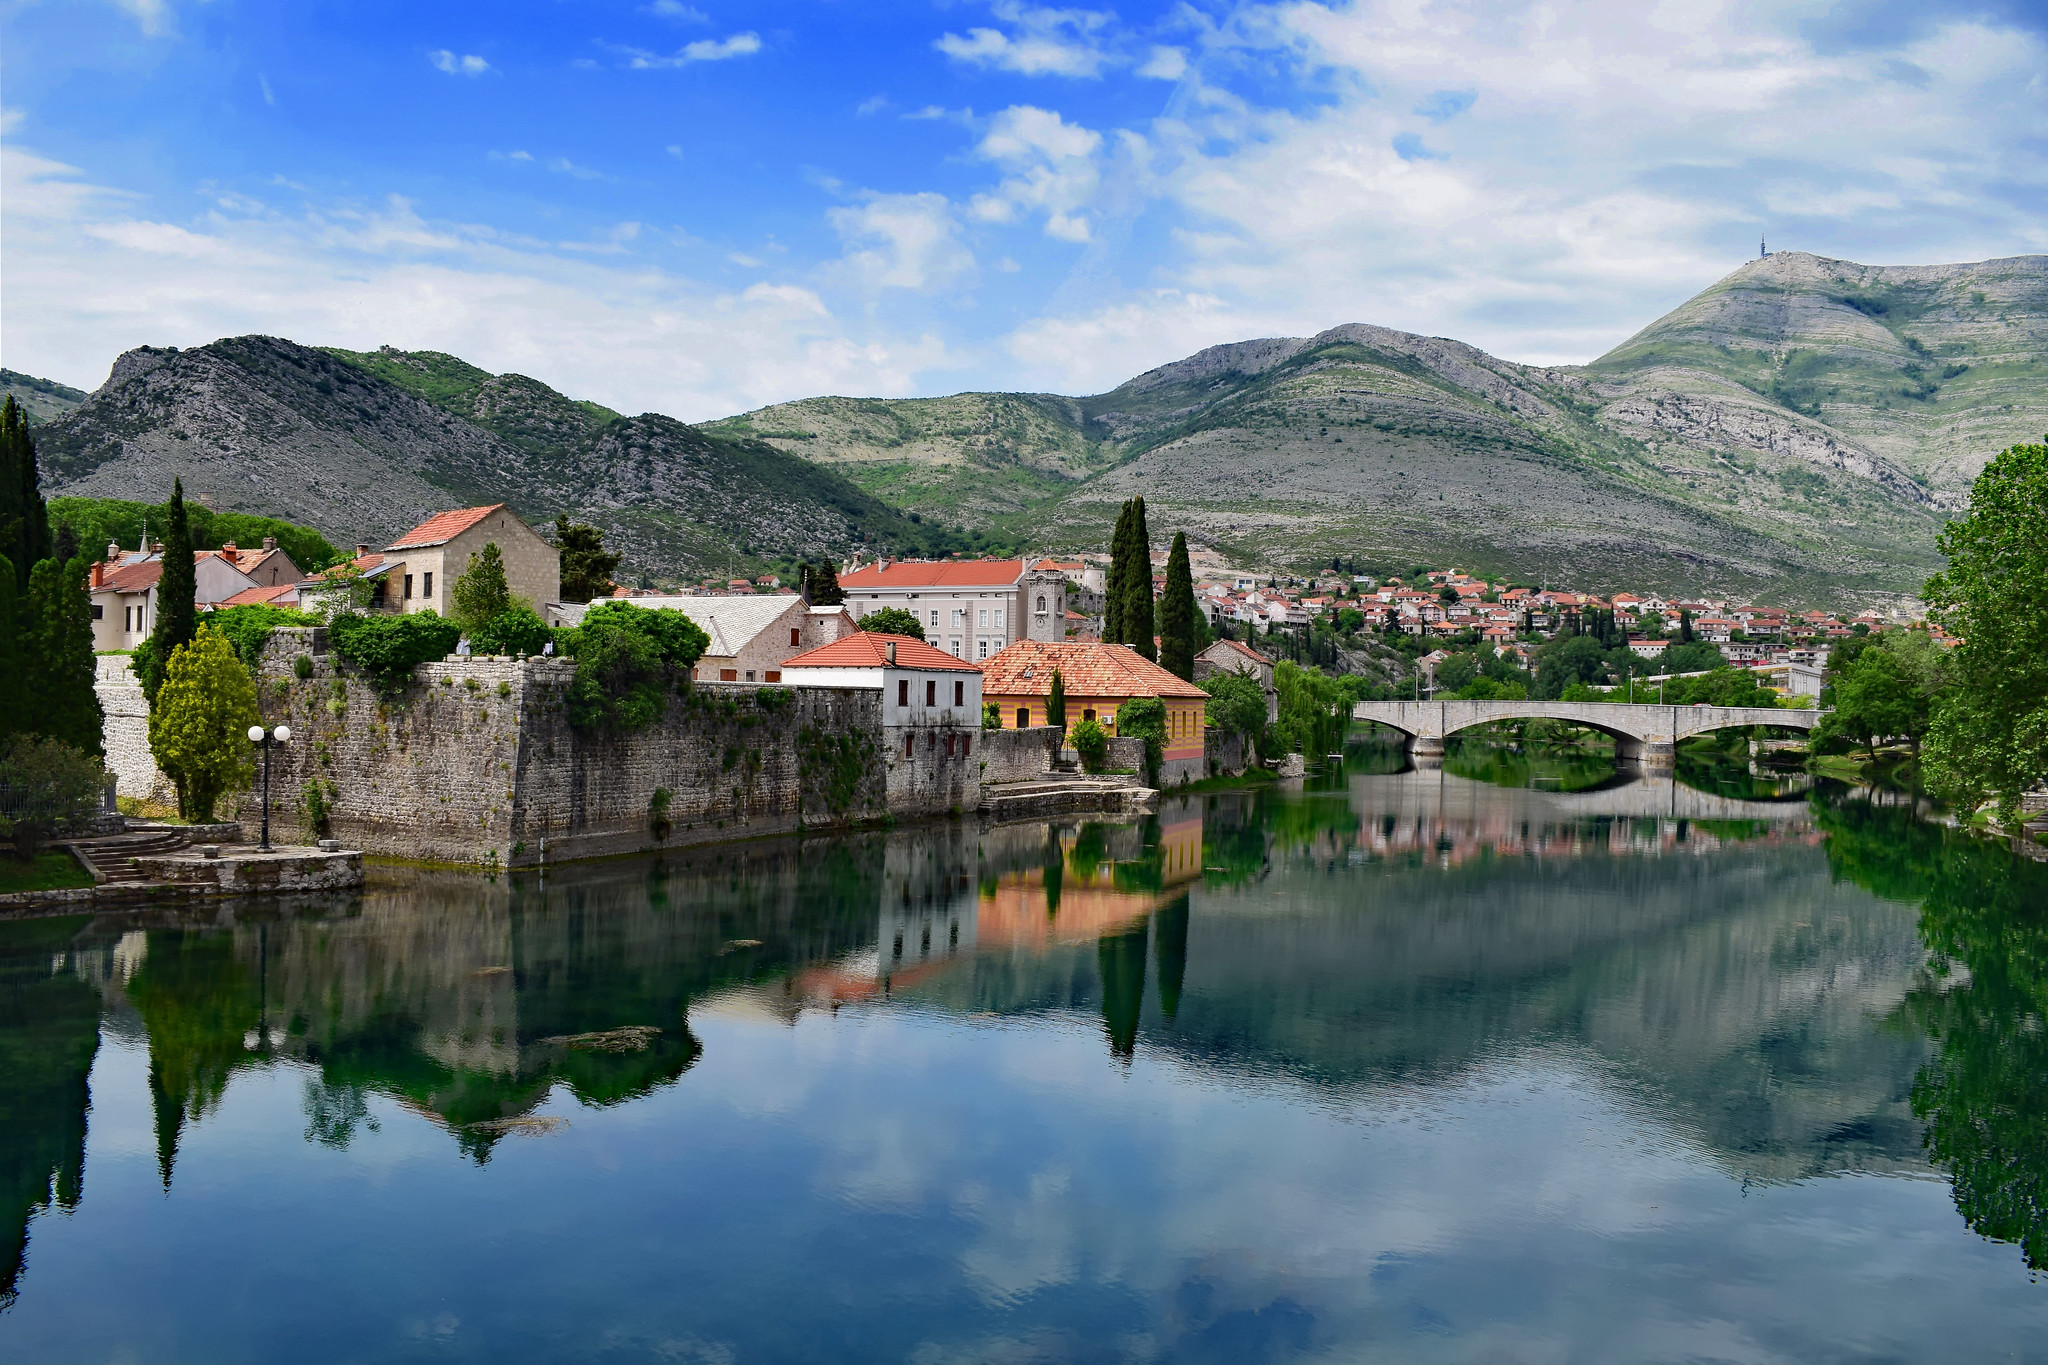 Facts about Bosnia and Herzegovina